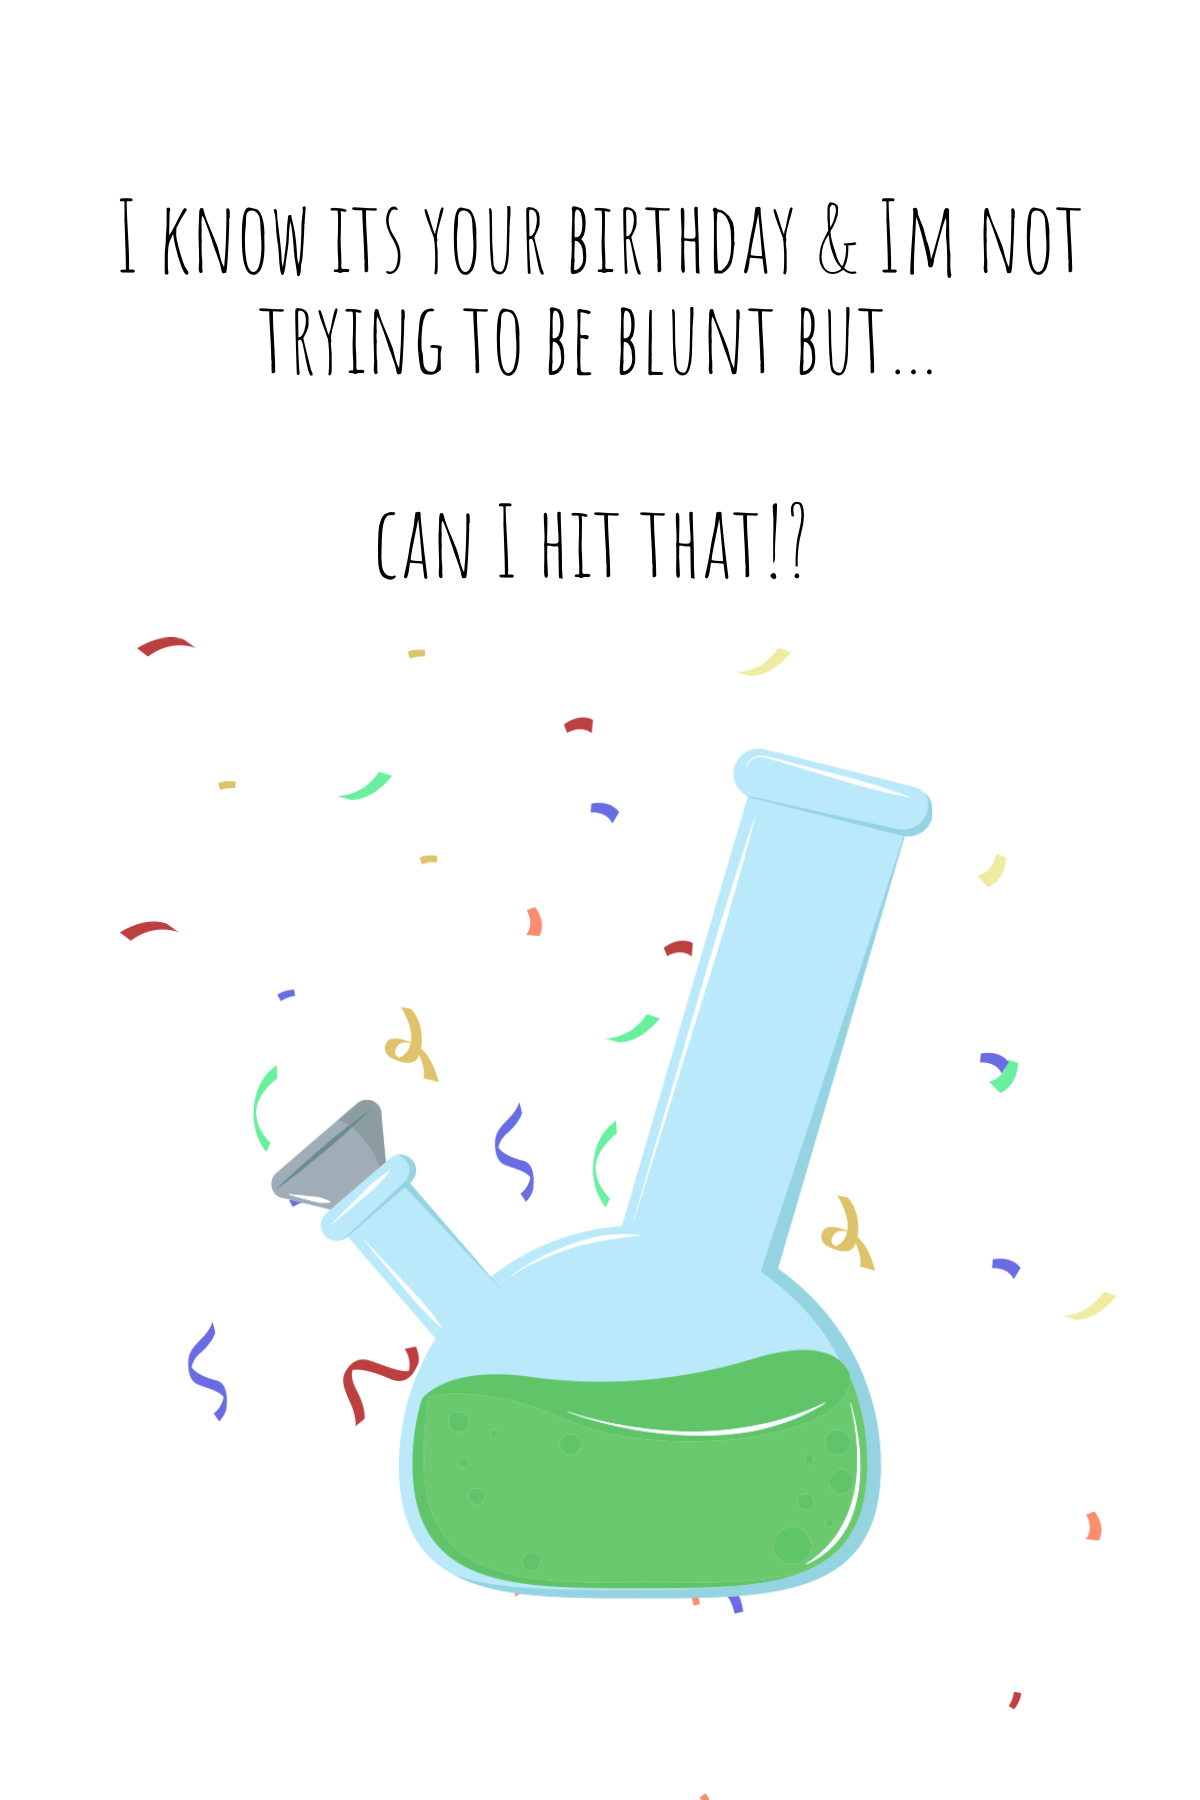 Birthday Cards - not trying to be blunt but can I hit that?